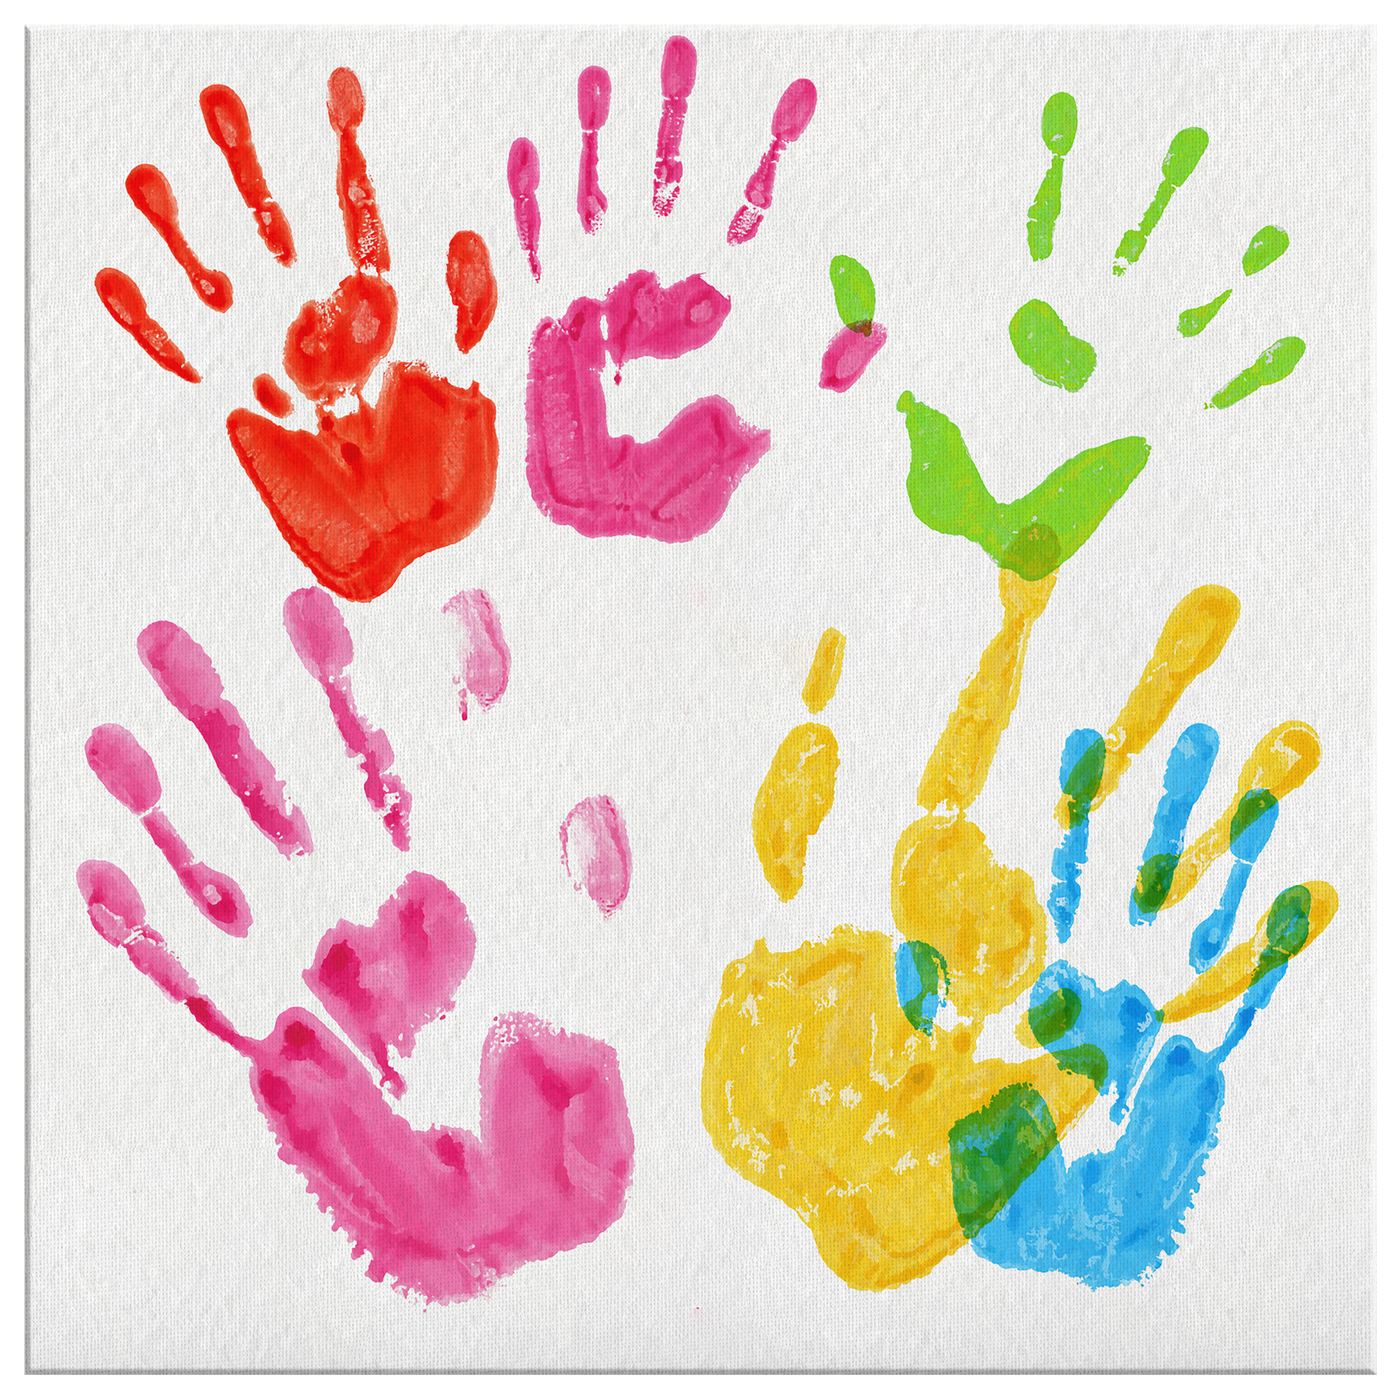 Hand Prints - Gallery Wrapped Canvas